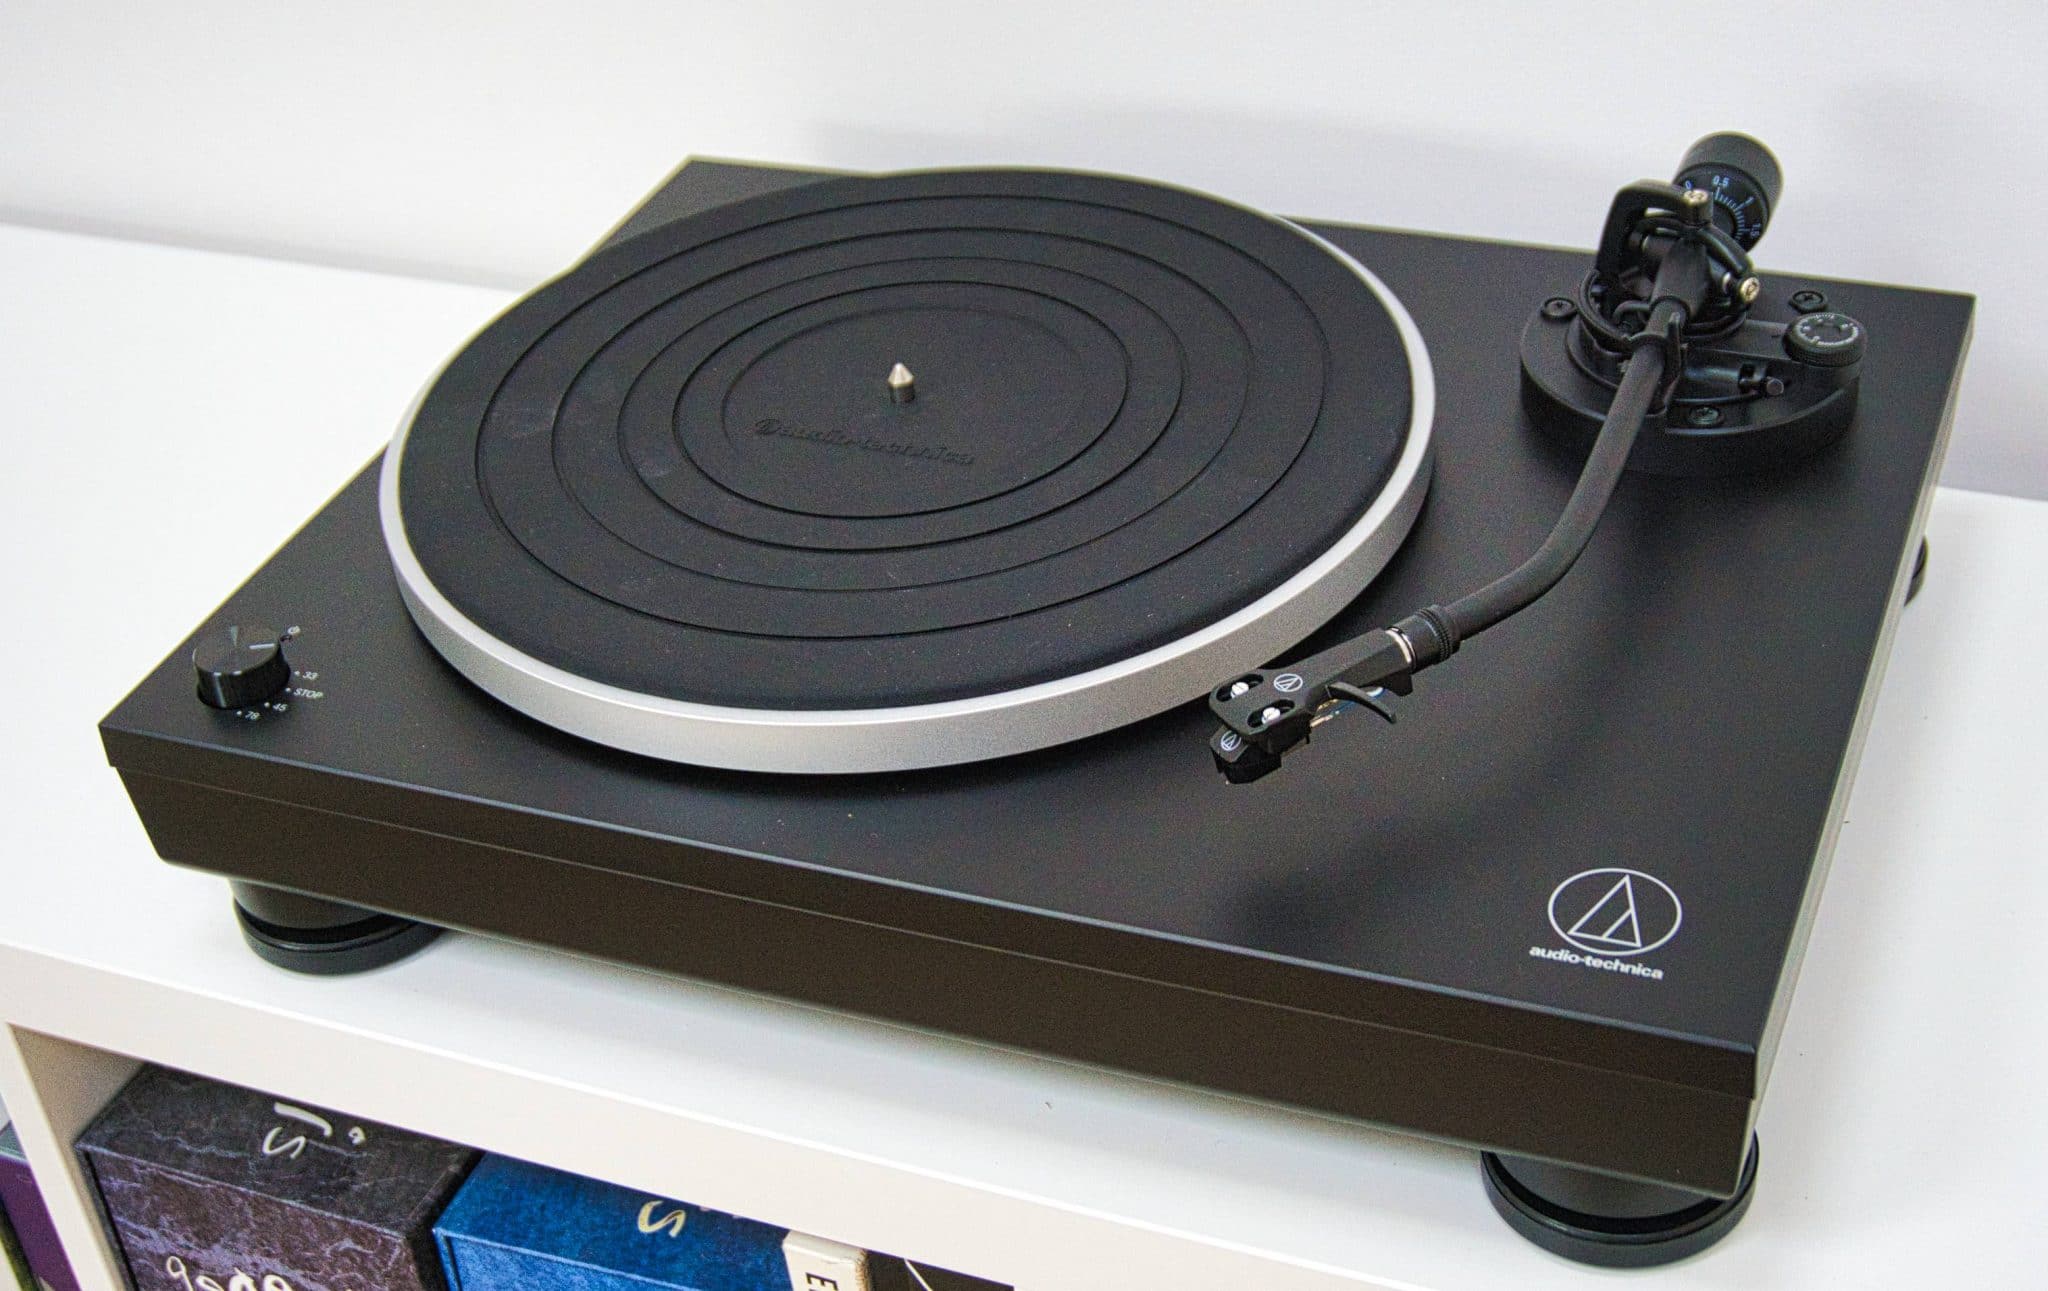 LP5x Turntable From Audio-Technica